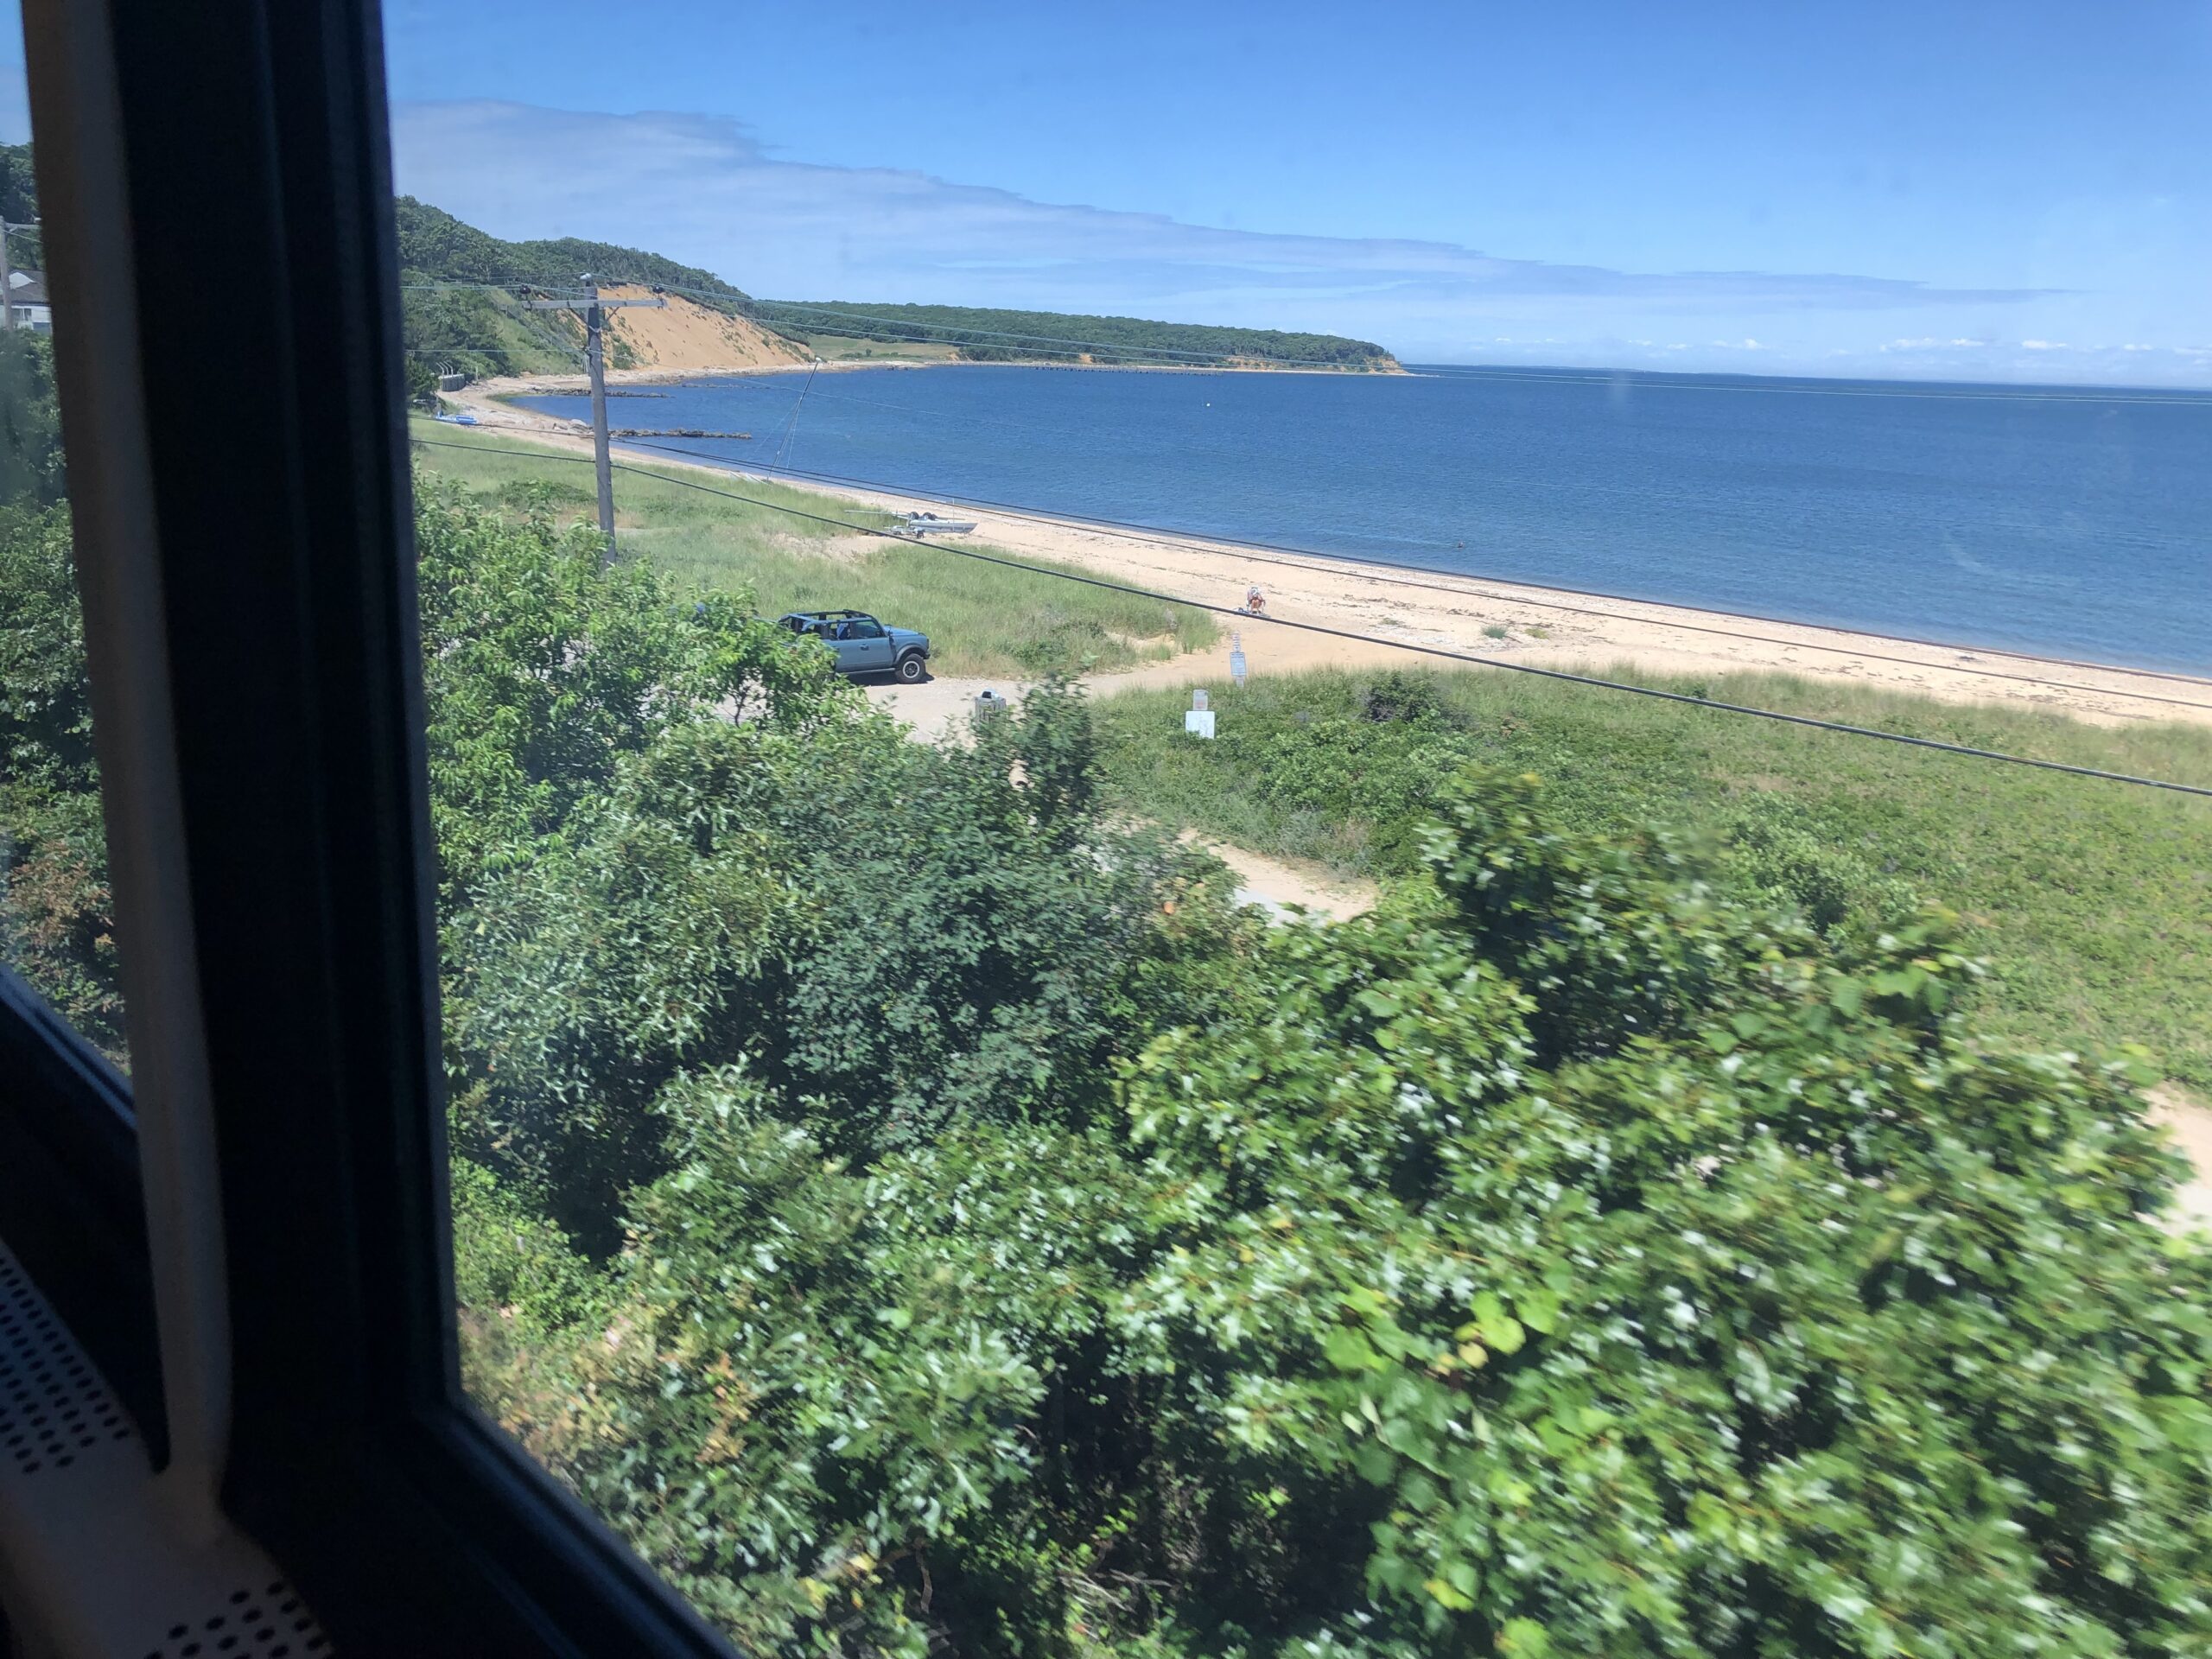 Taking the Long Island Rail Road helps reduce CO2 emissions, unclogs the infamous Hamptons gridlock, and as regular Carley Wootton points out, “It’s fun peaking into backyard barbecues, tennis and golf clubs, vineyards and stables… a much better view than on the LIE.” CARLEY WOOTTON